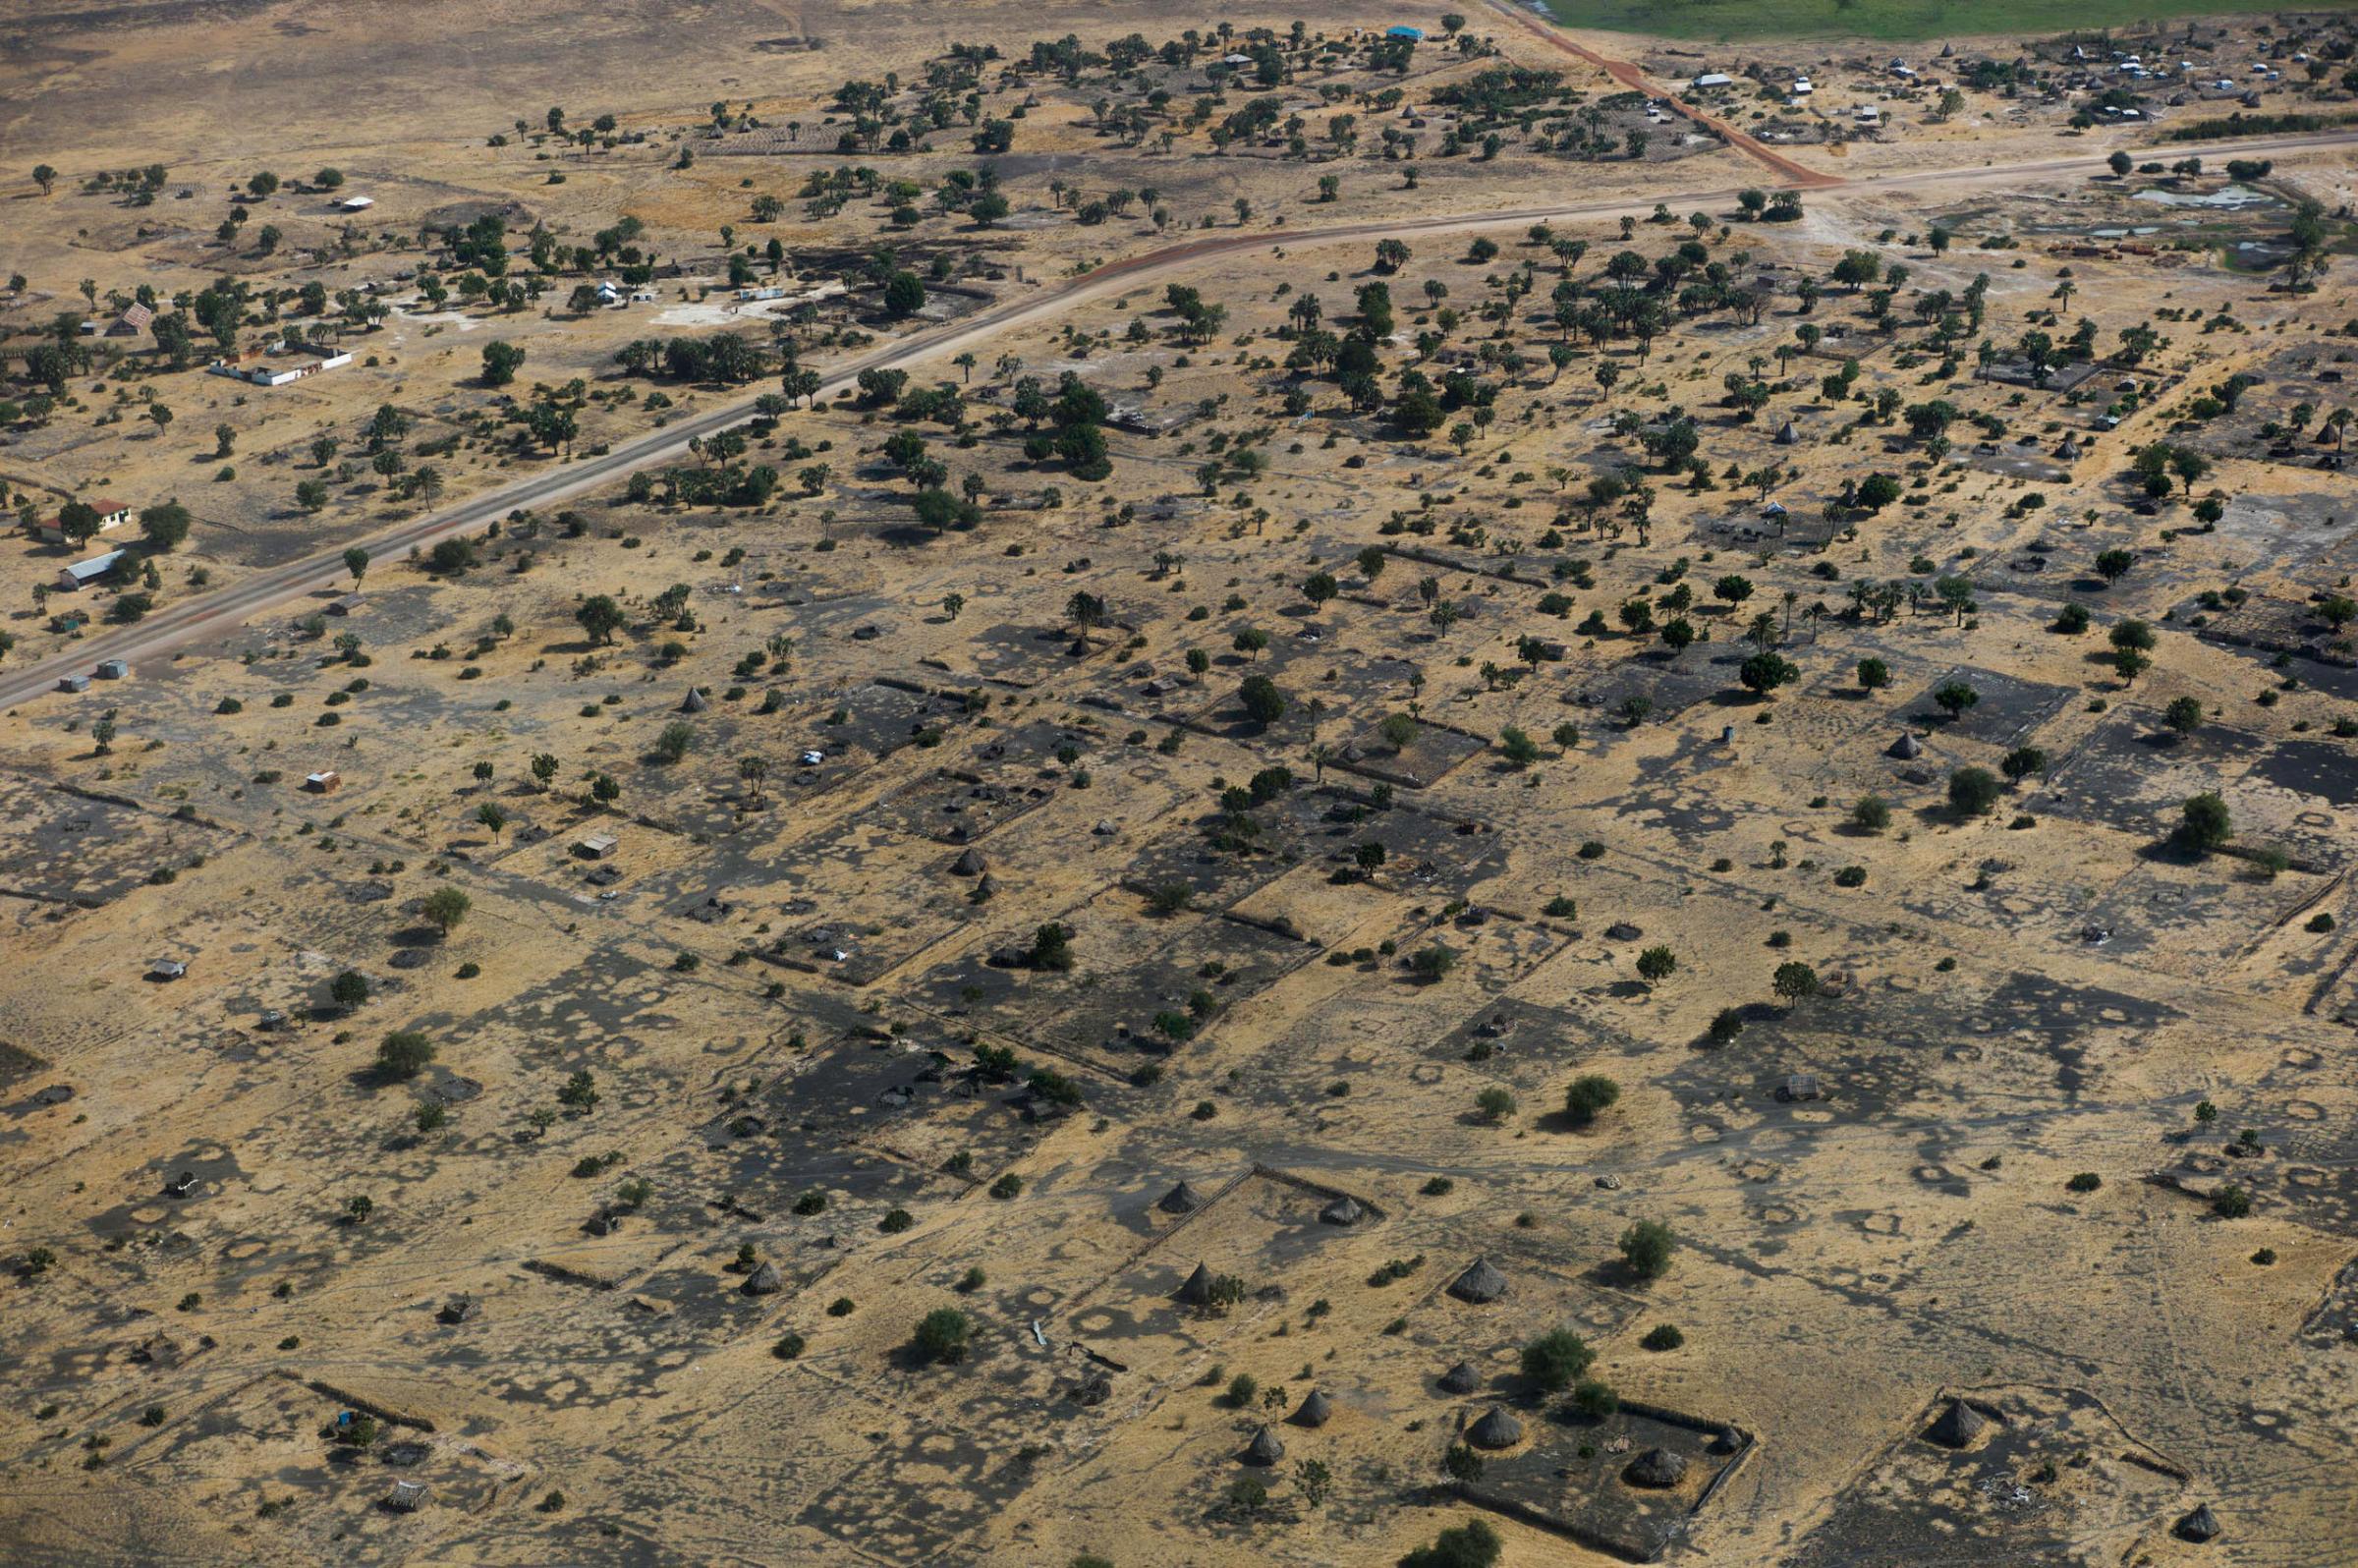 An aerial view of the empty and completely destroyed town of Leer, Unity State, South Sudan.